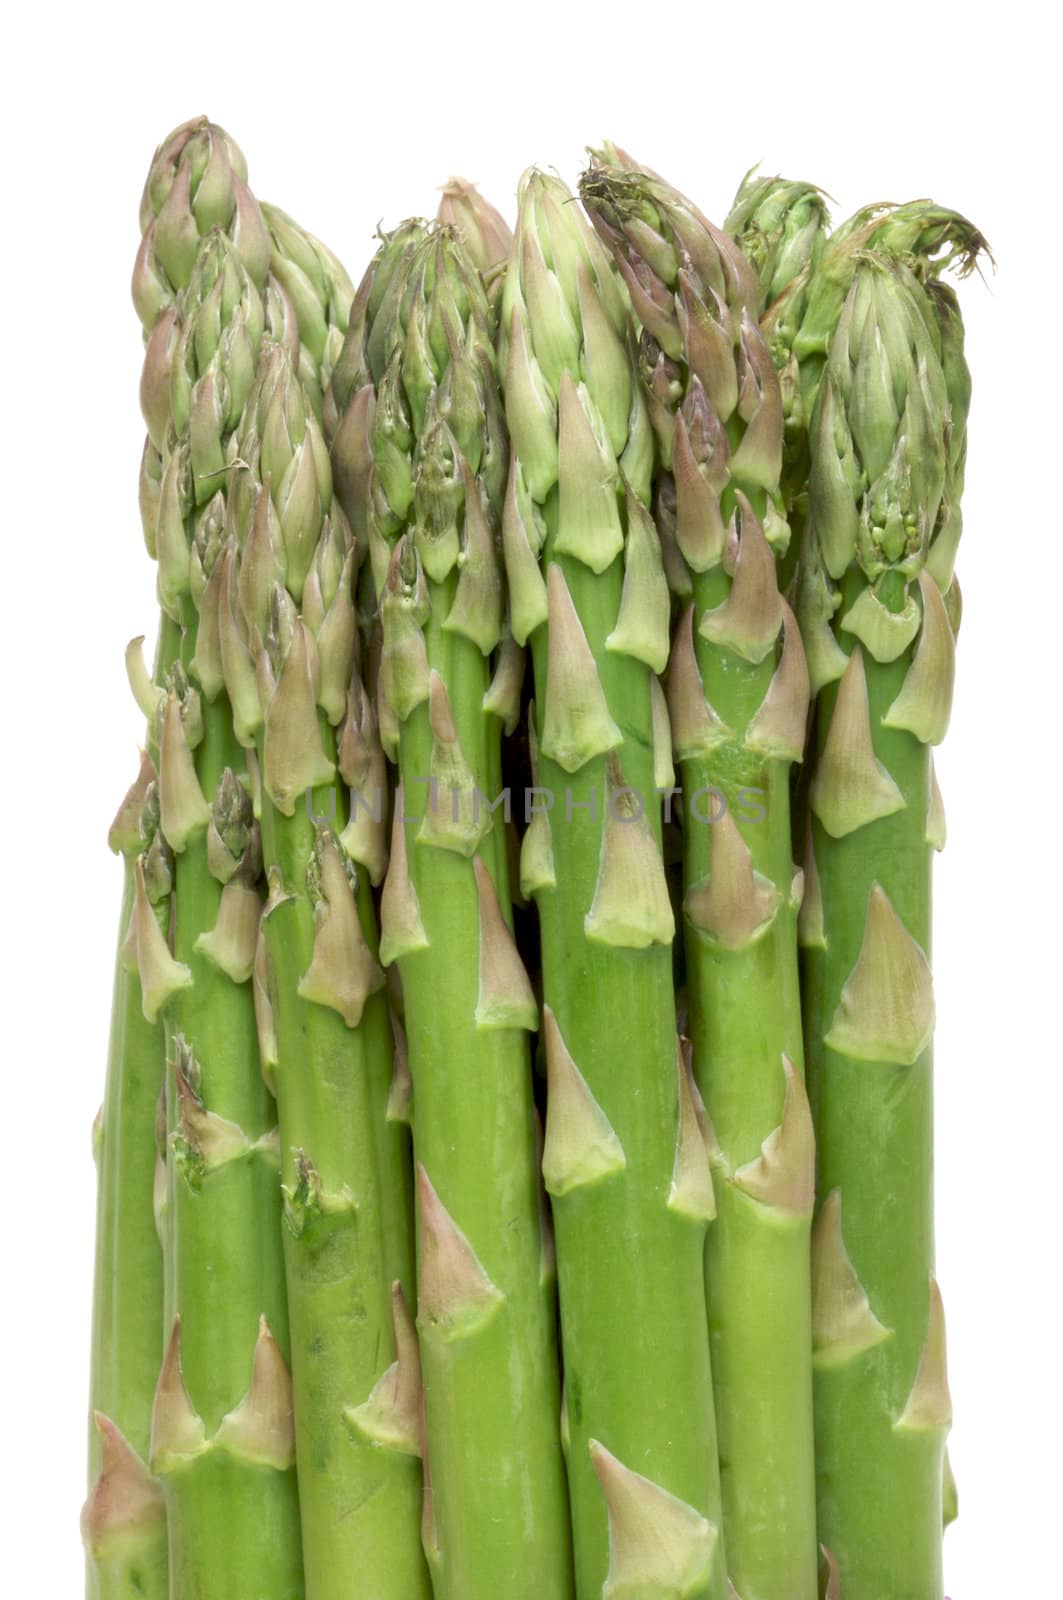 Fresh Organic Asparagus Isolated on a White Background.